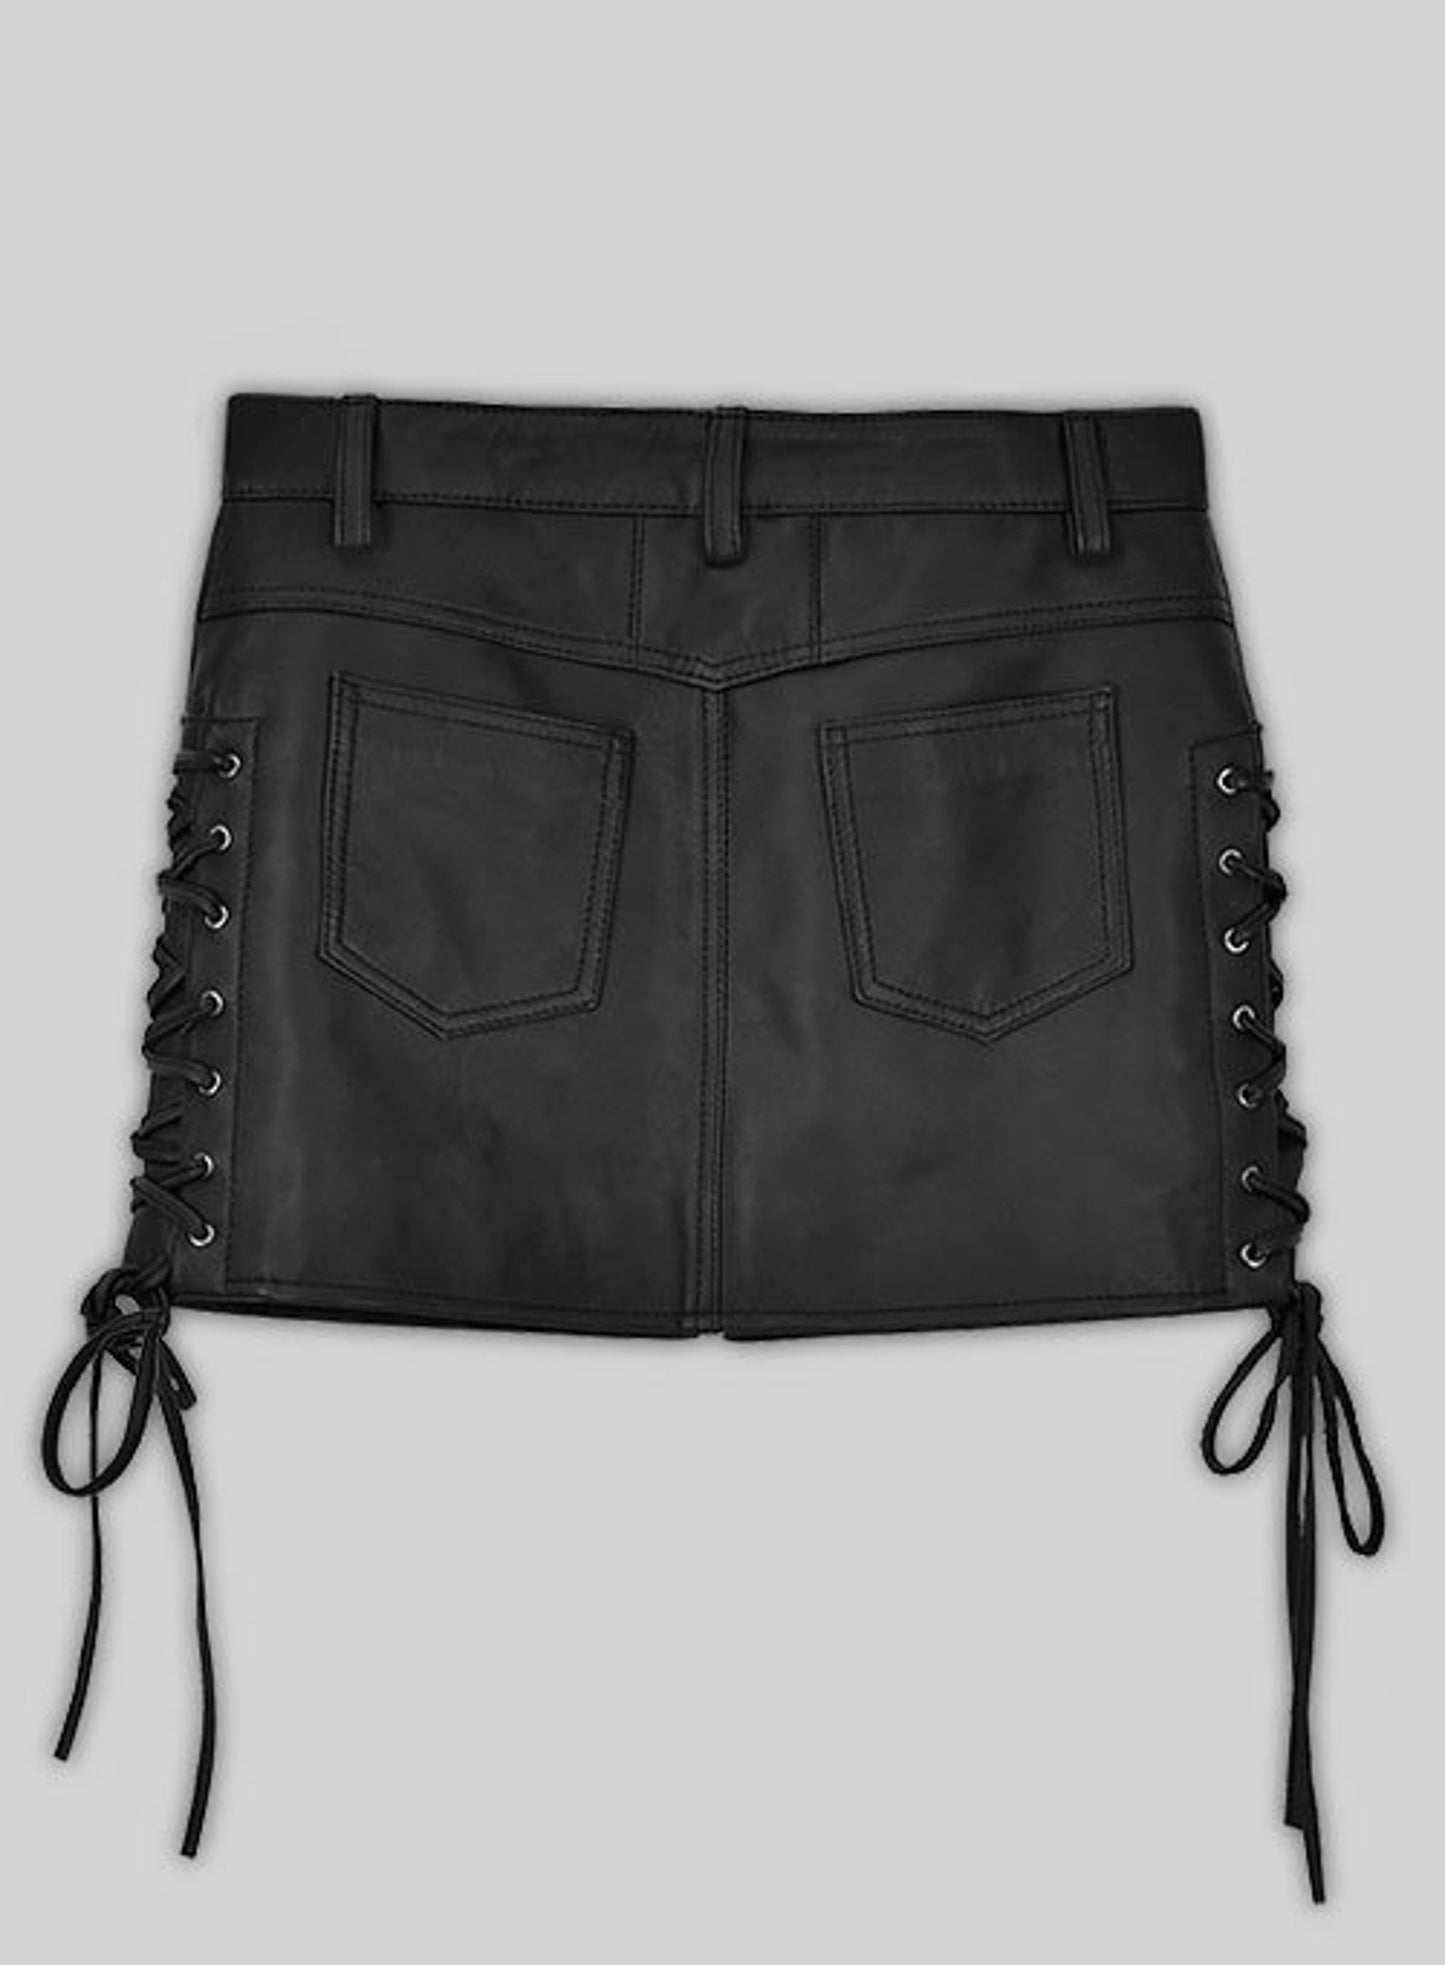 Real Leather Women Mini Skirt Side Lace Up